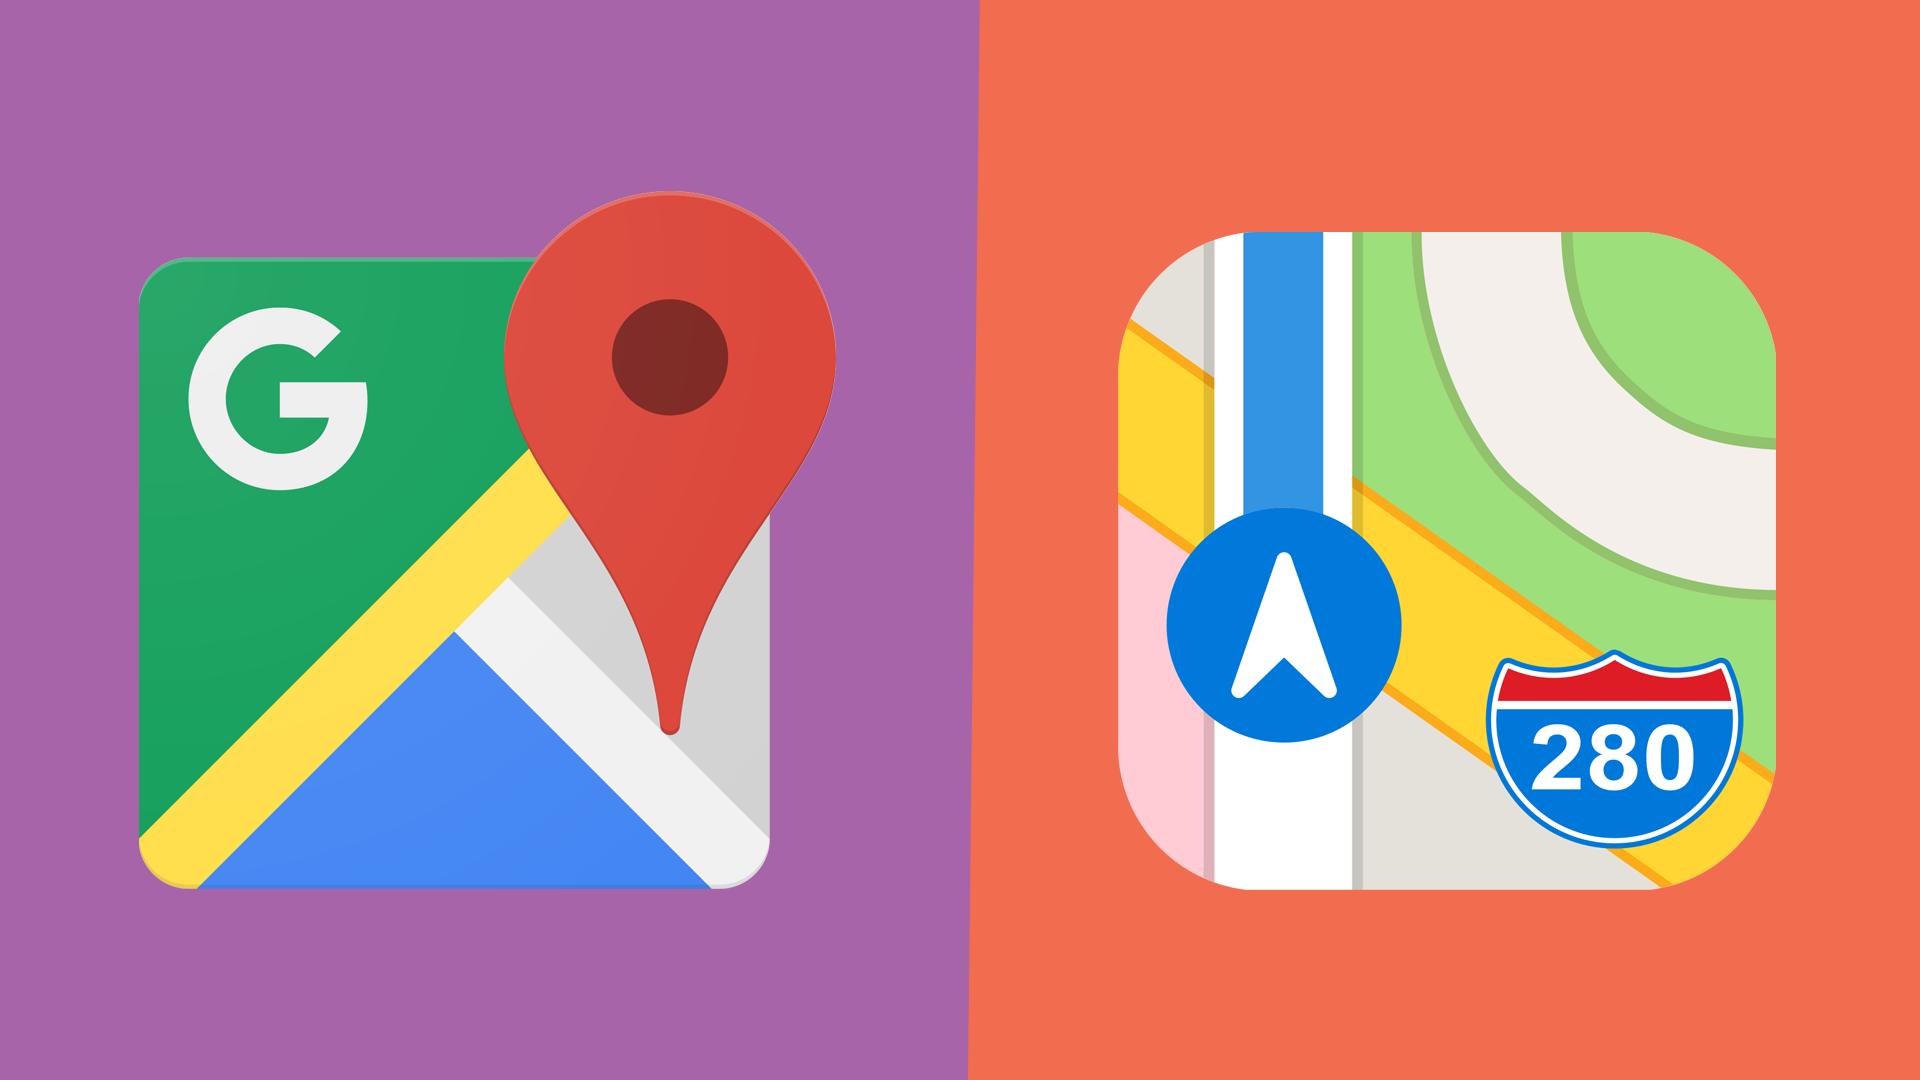 What Map App Is Better Than Google Earth 